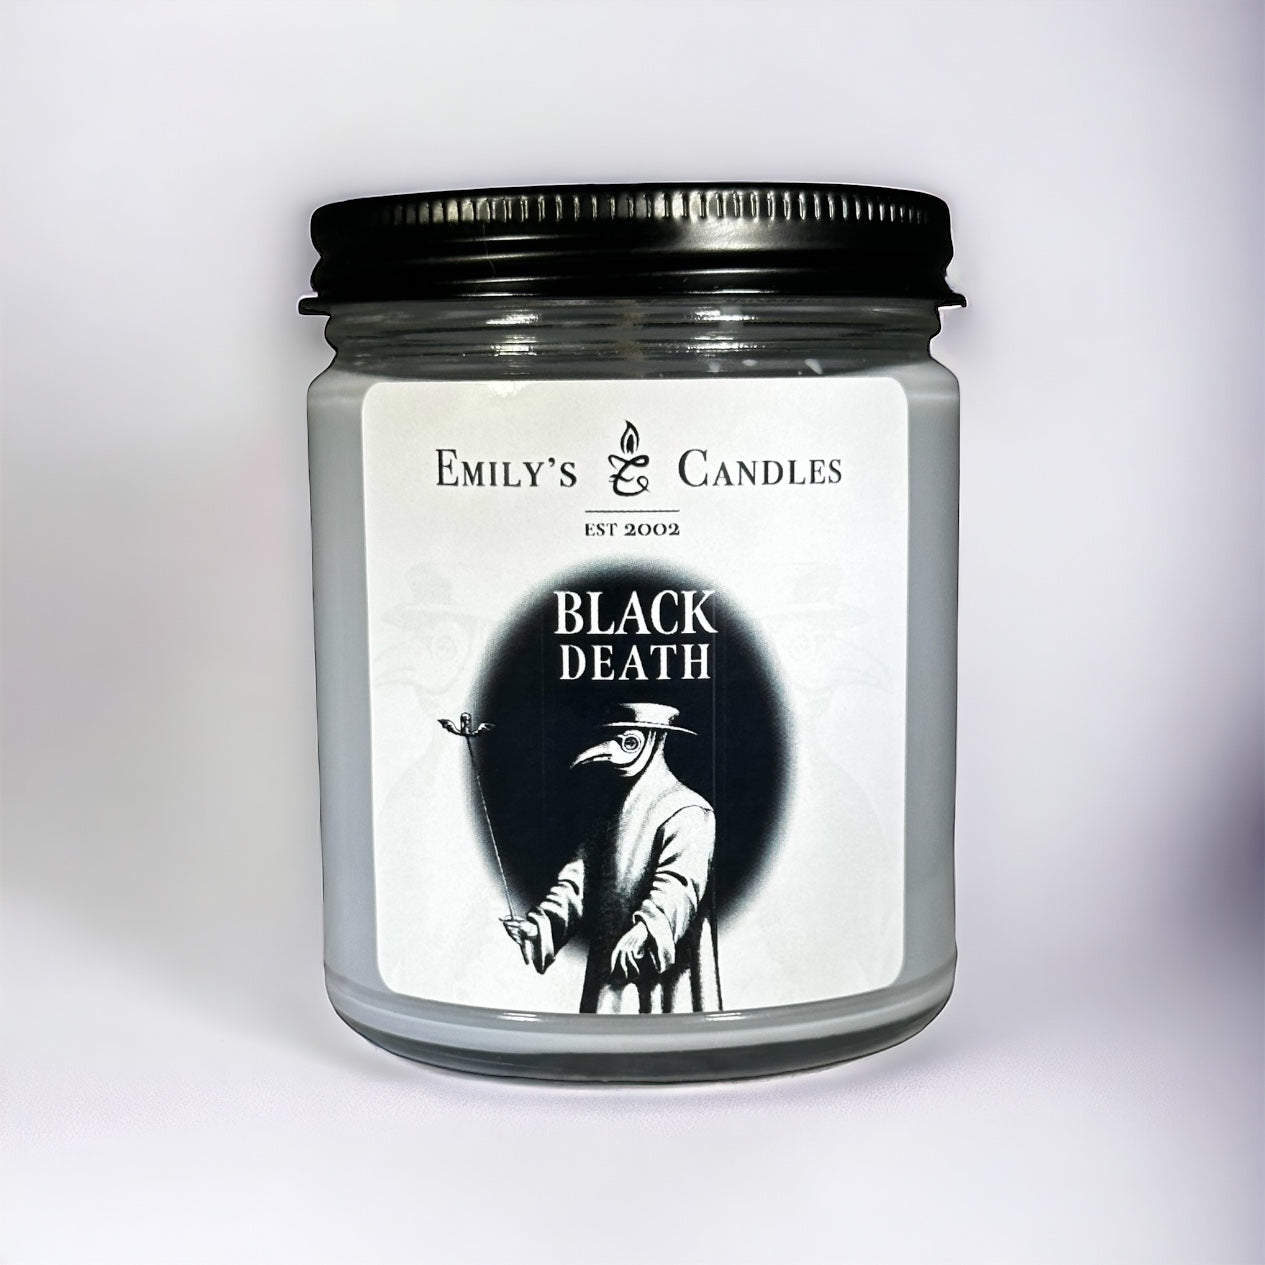 9 Oz Soy Candle Black Death Scent